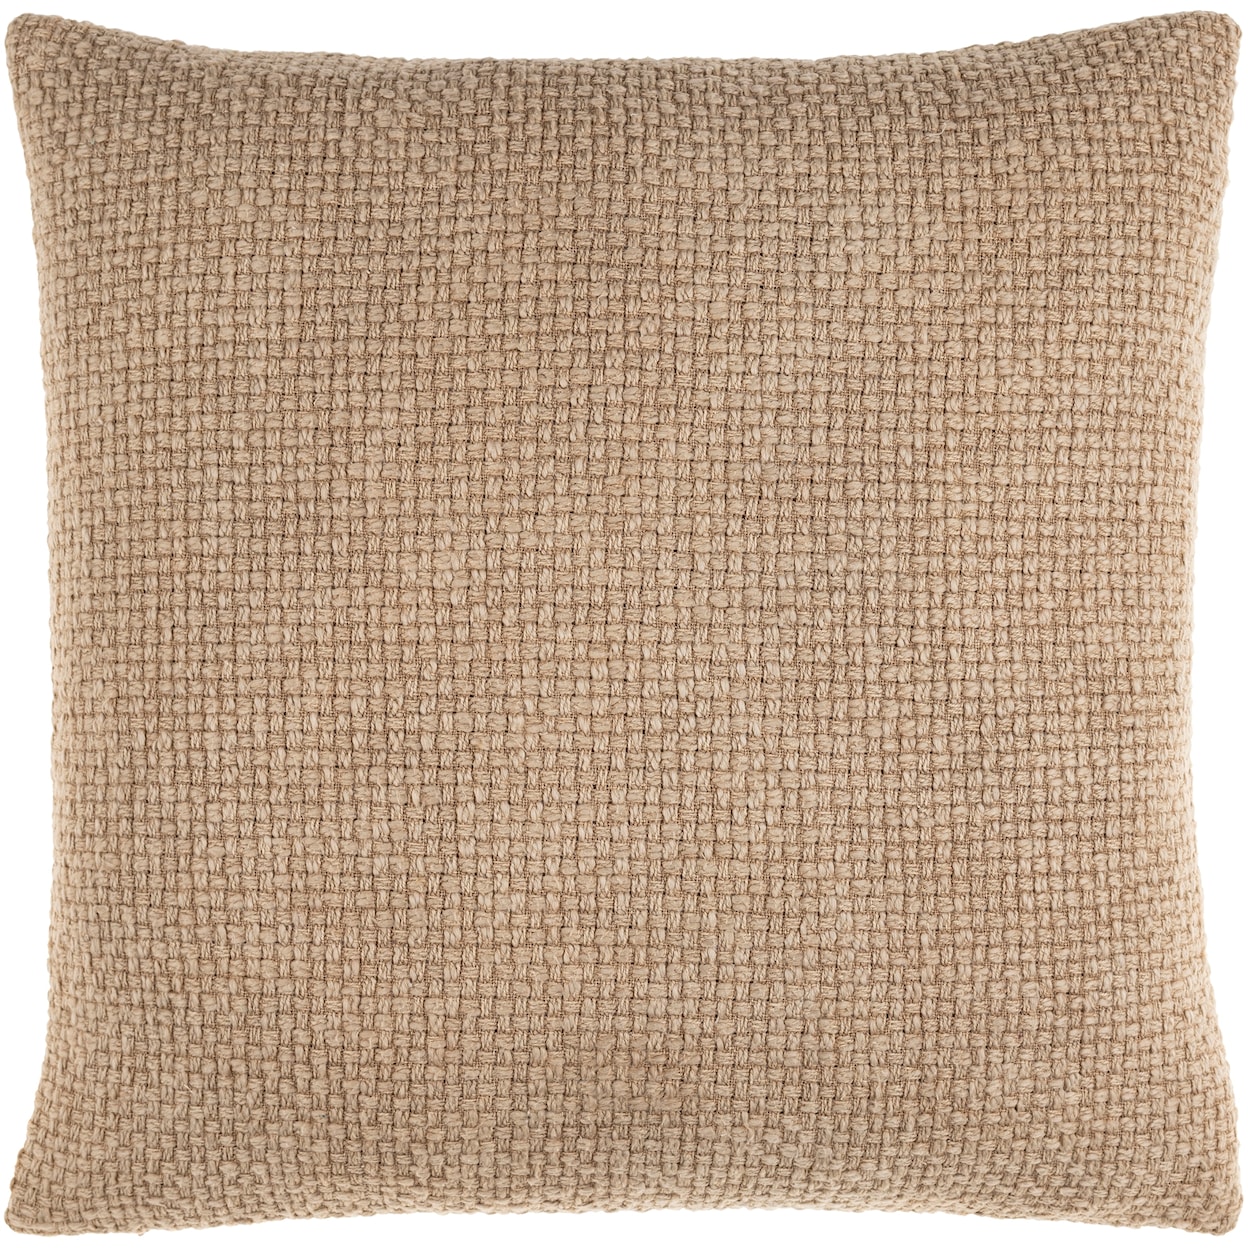 Surya Rugs Washed Texture Pillow Kit